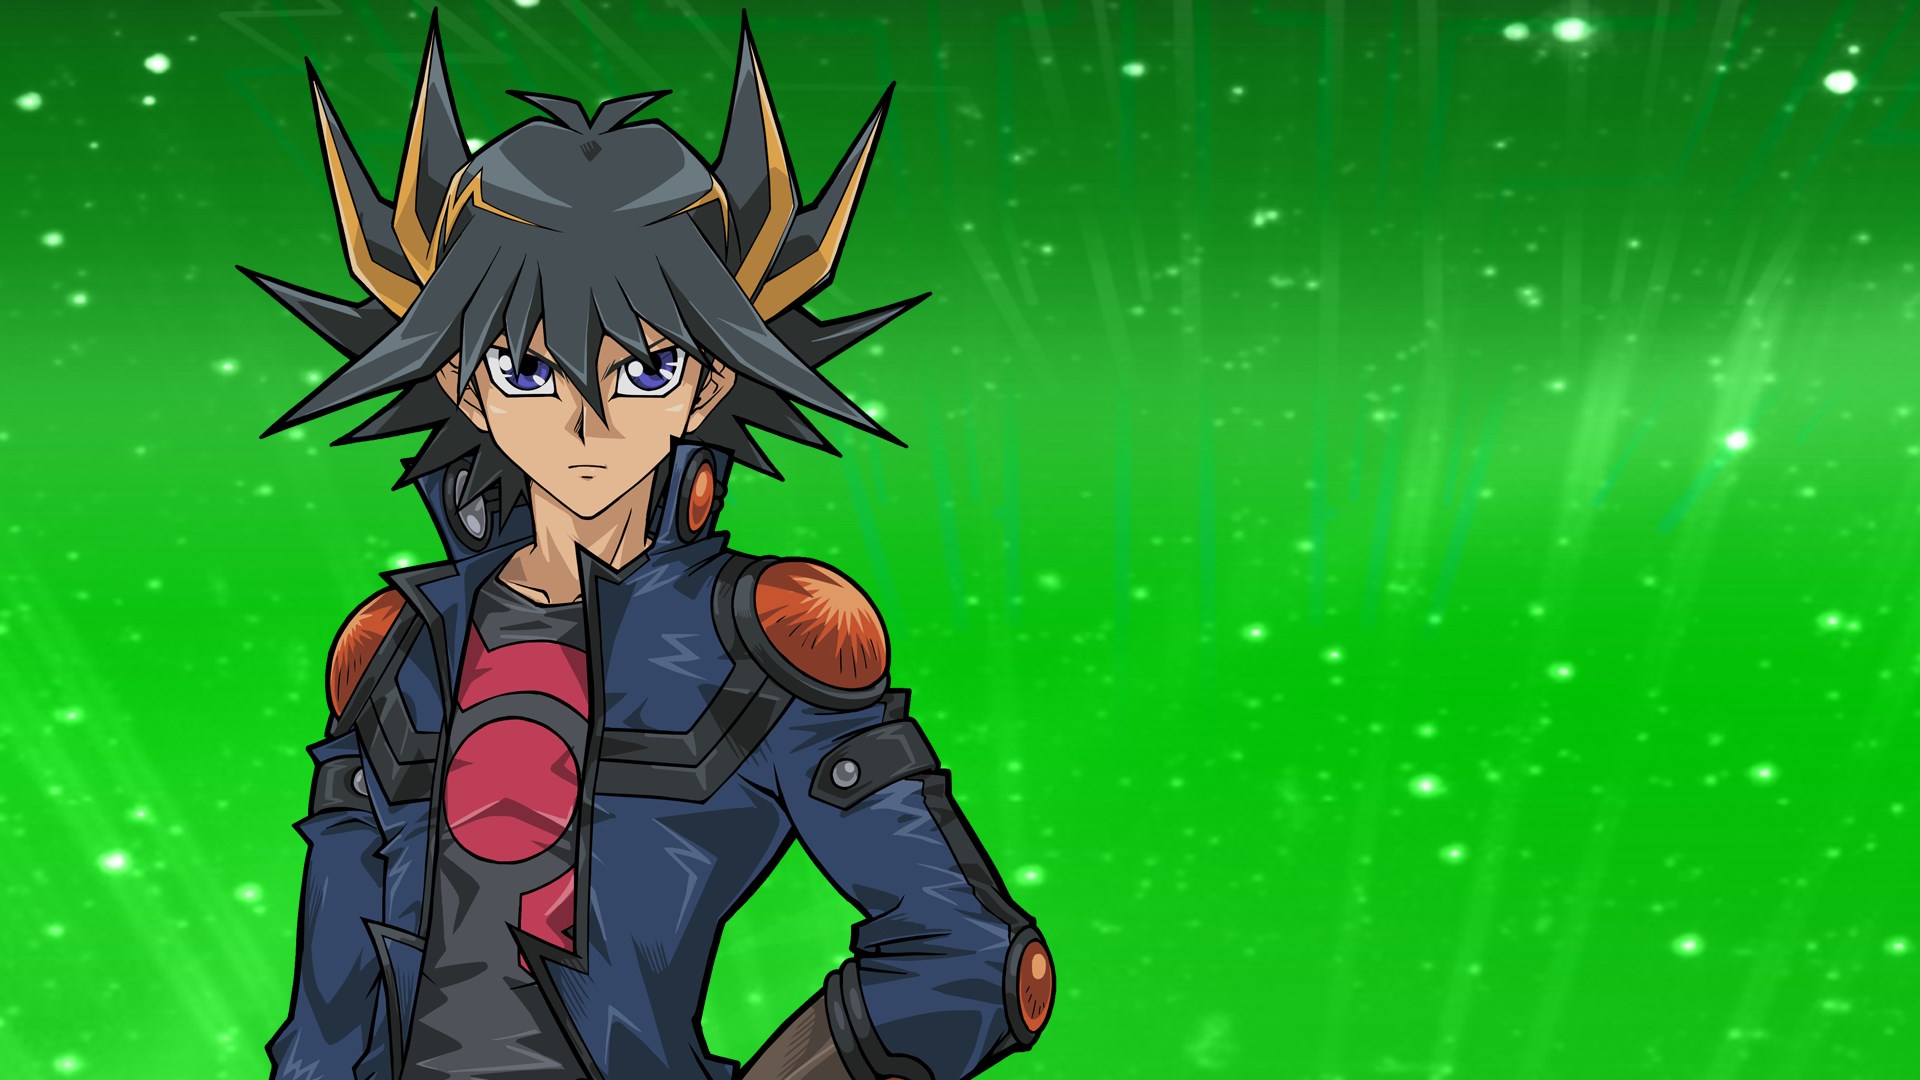 Yu-Gi-Oh! 5D's HD Wallpapers and Backgrounds